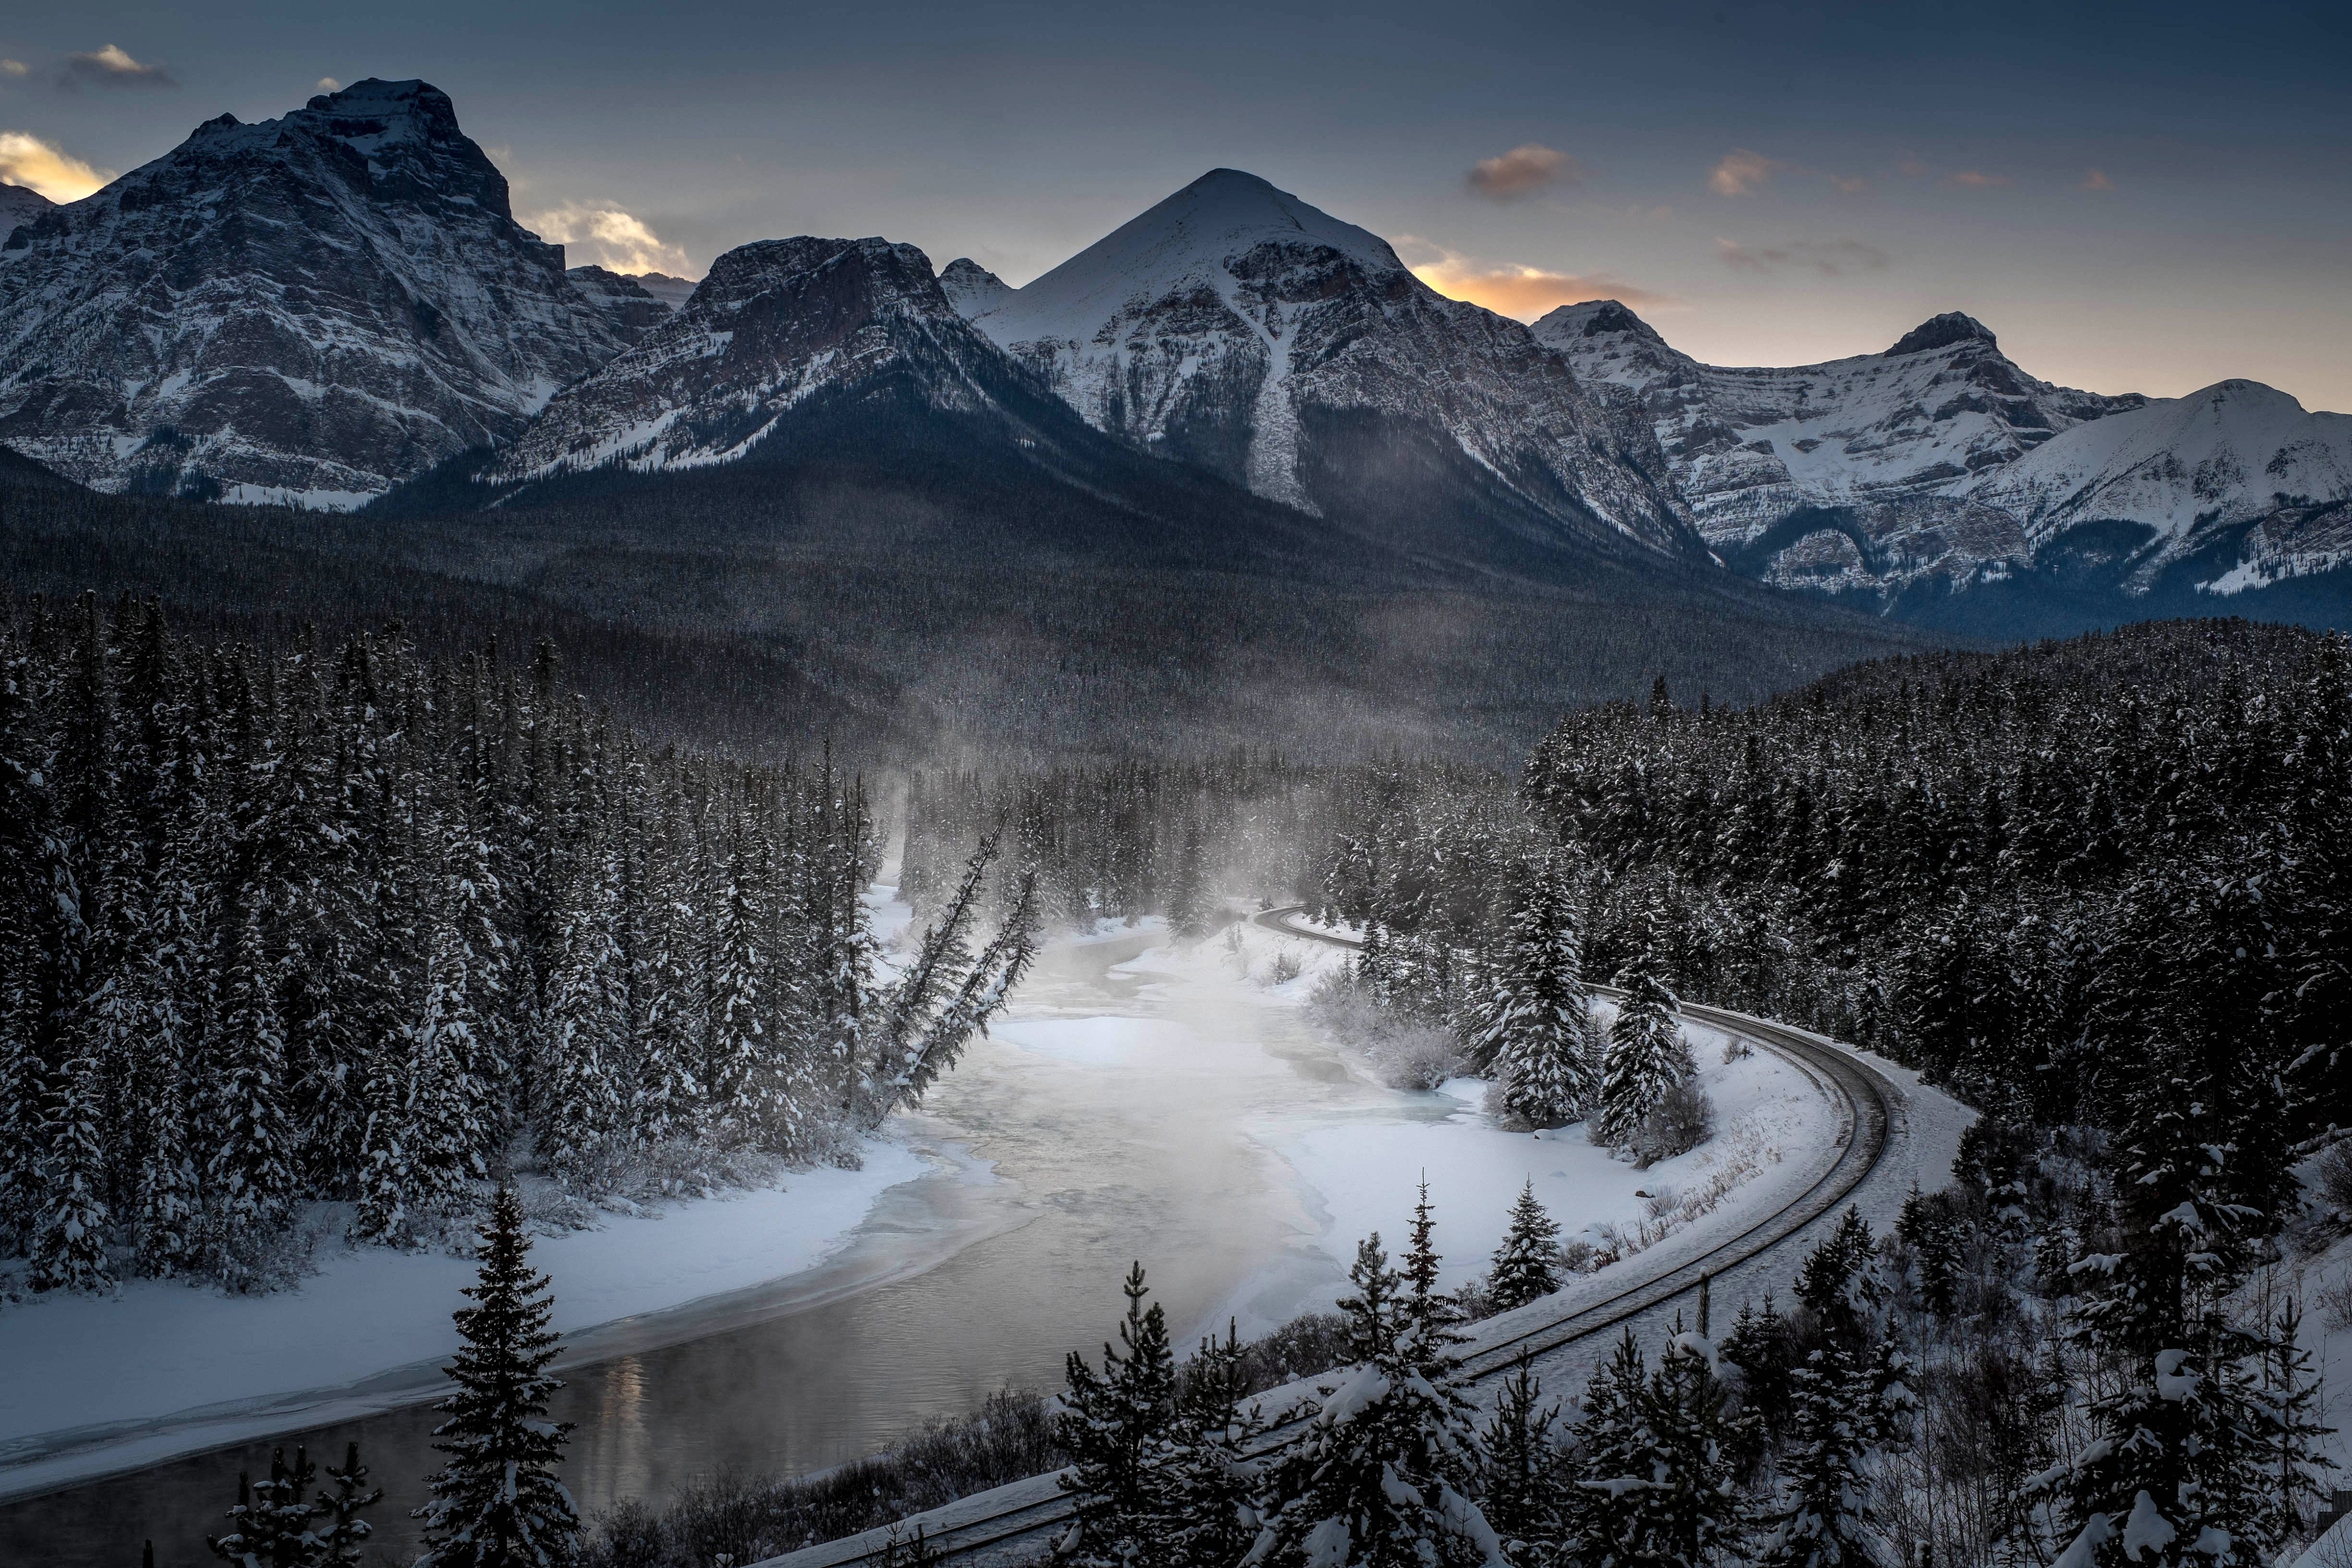 The famous Morant's Curve, offering a beautiful view of the frozen Bow River and the Canadian Pacific Railway at Banff National Park near Lake Louise, Canada, on Dec. 6, 2013 (JOE KLAMAR—AFP/Getty Images)